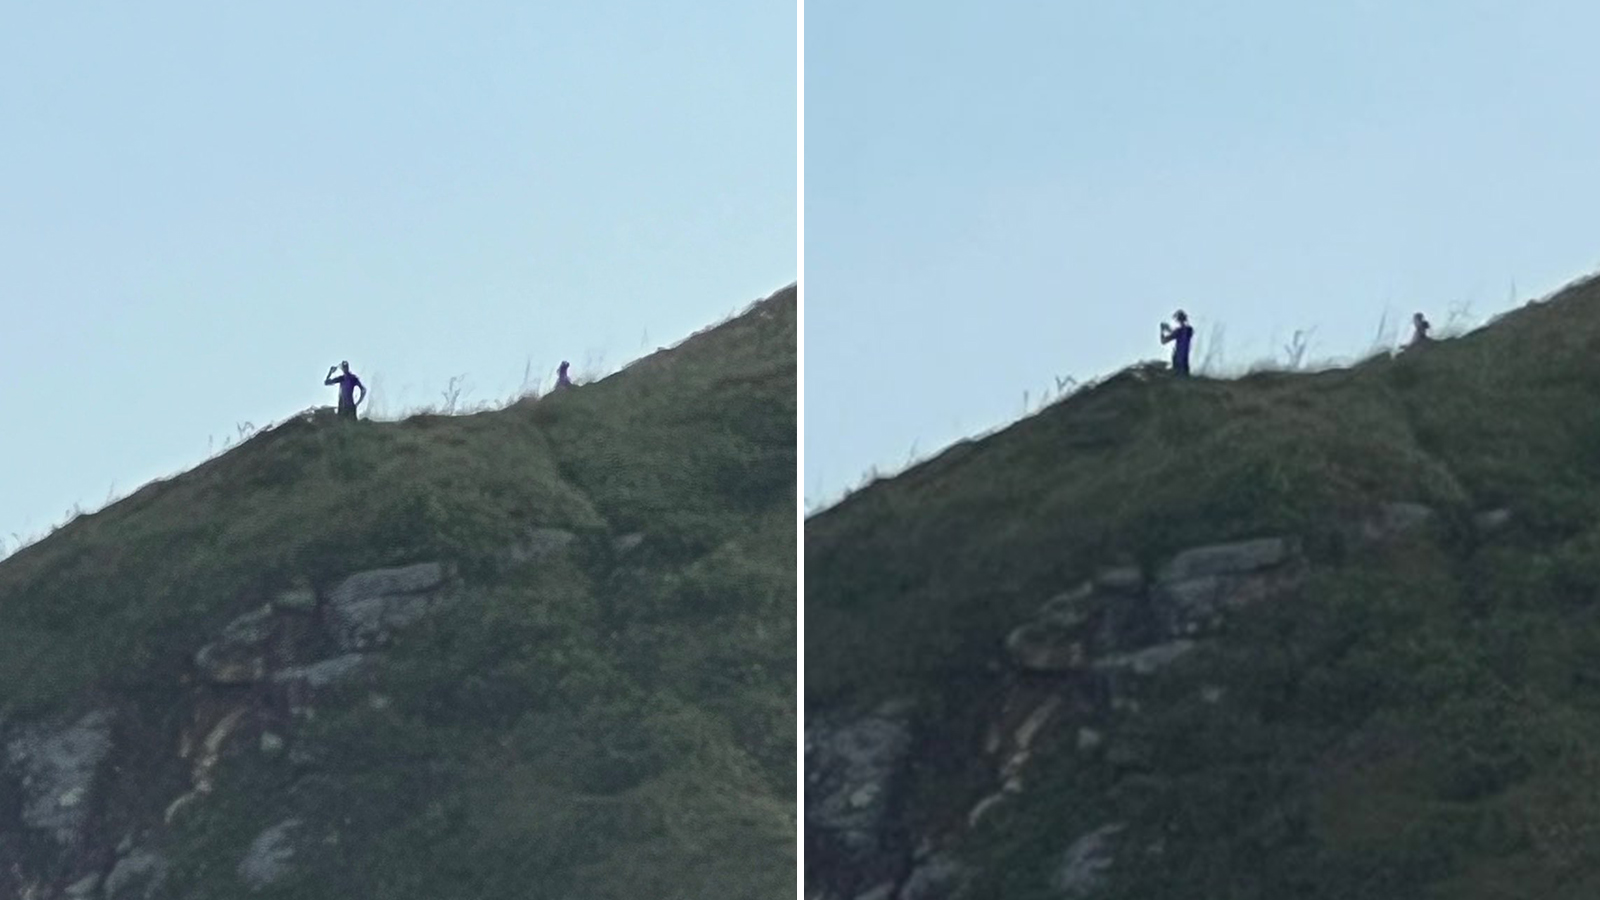 More 10 ft ‘aliens’ spotted by hikers in Brazil after Miami mall